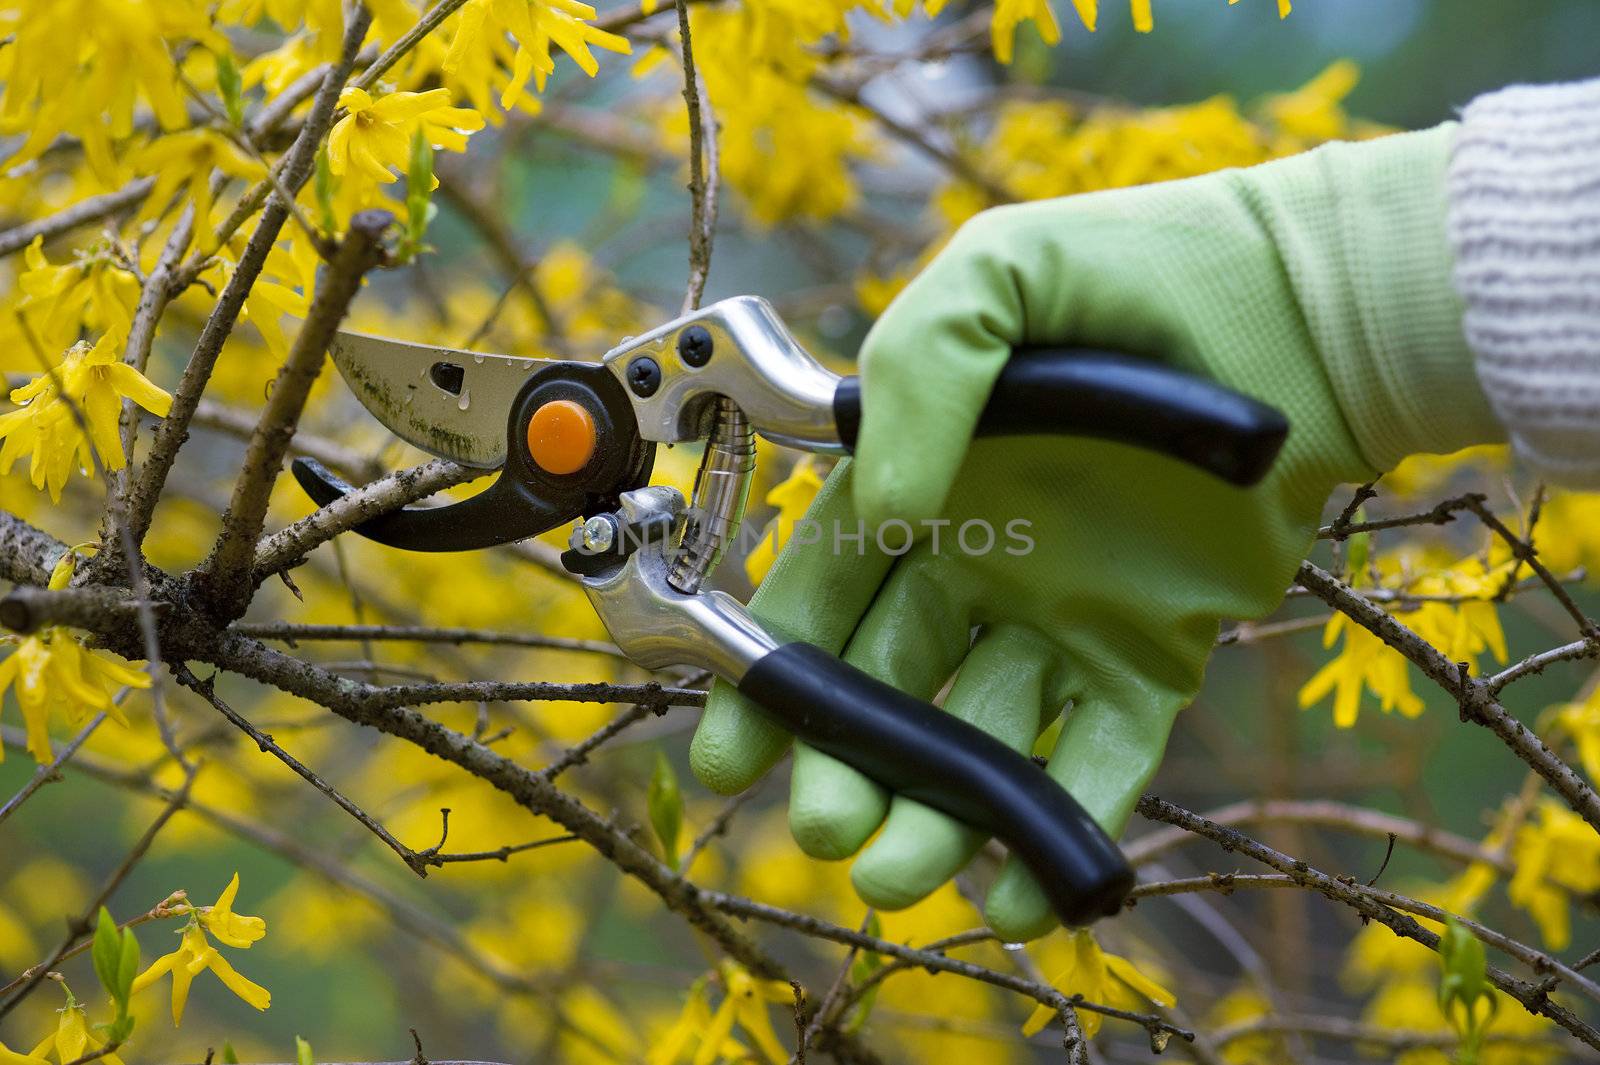 Pruning shrubs by f/2sumicron